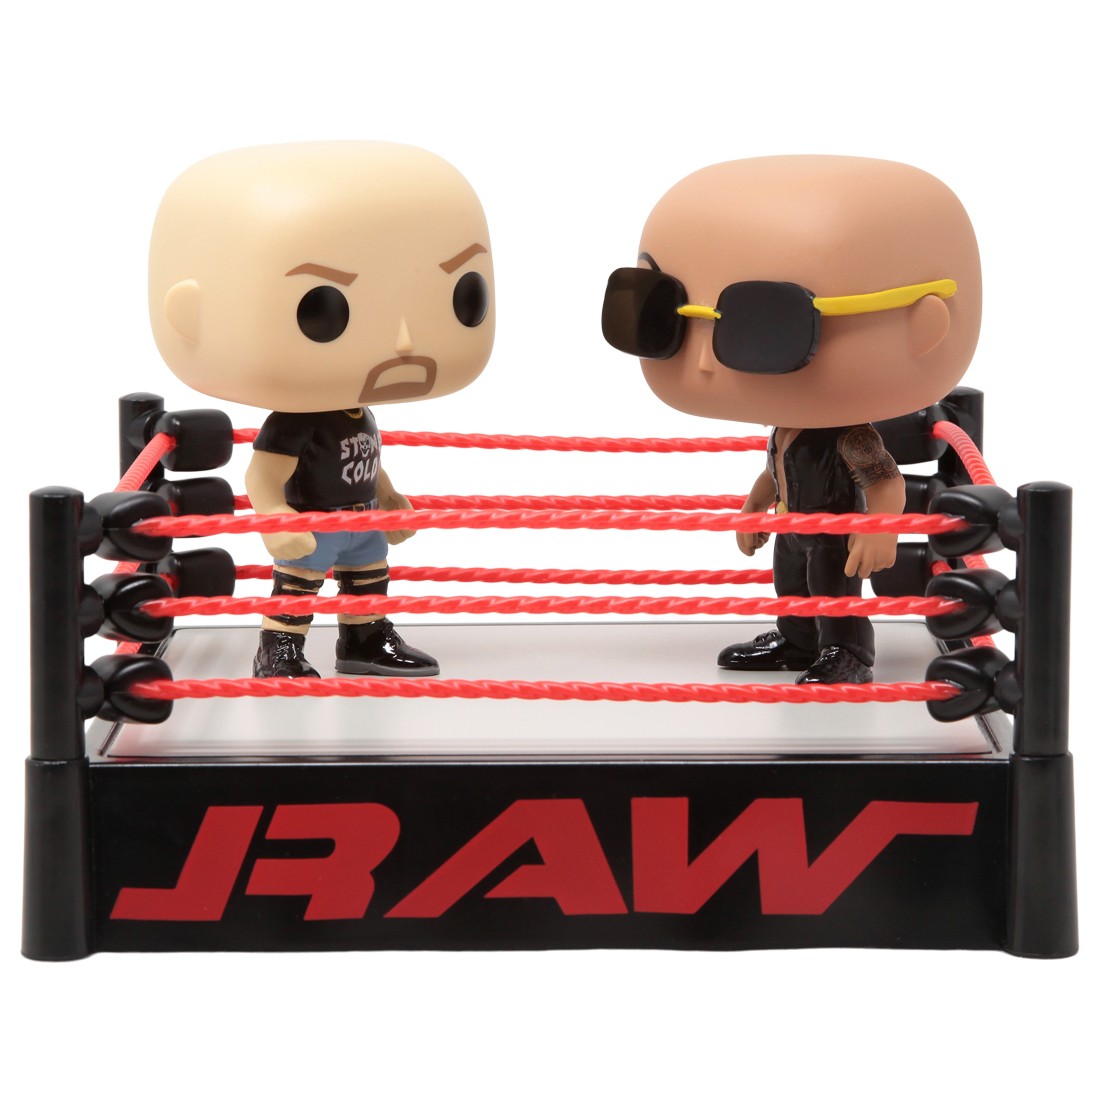 Funko POP Moment WWE - Stone Cold Steve Austin And The Rock (red)